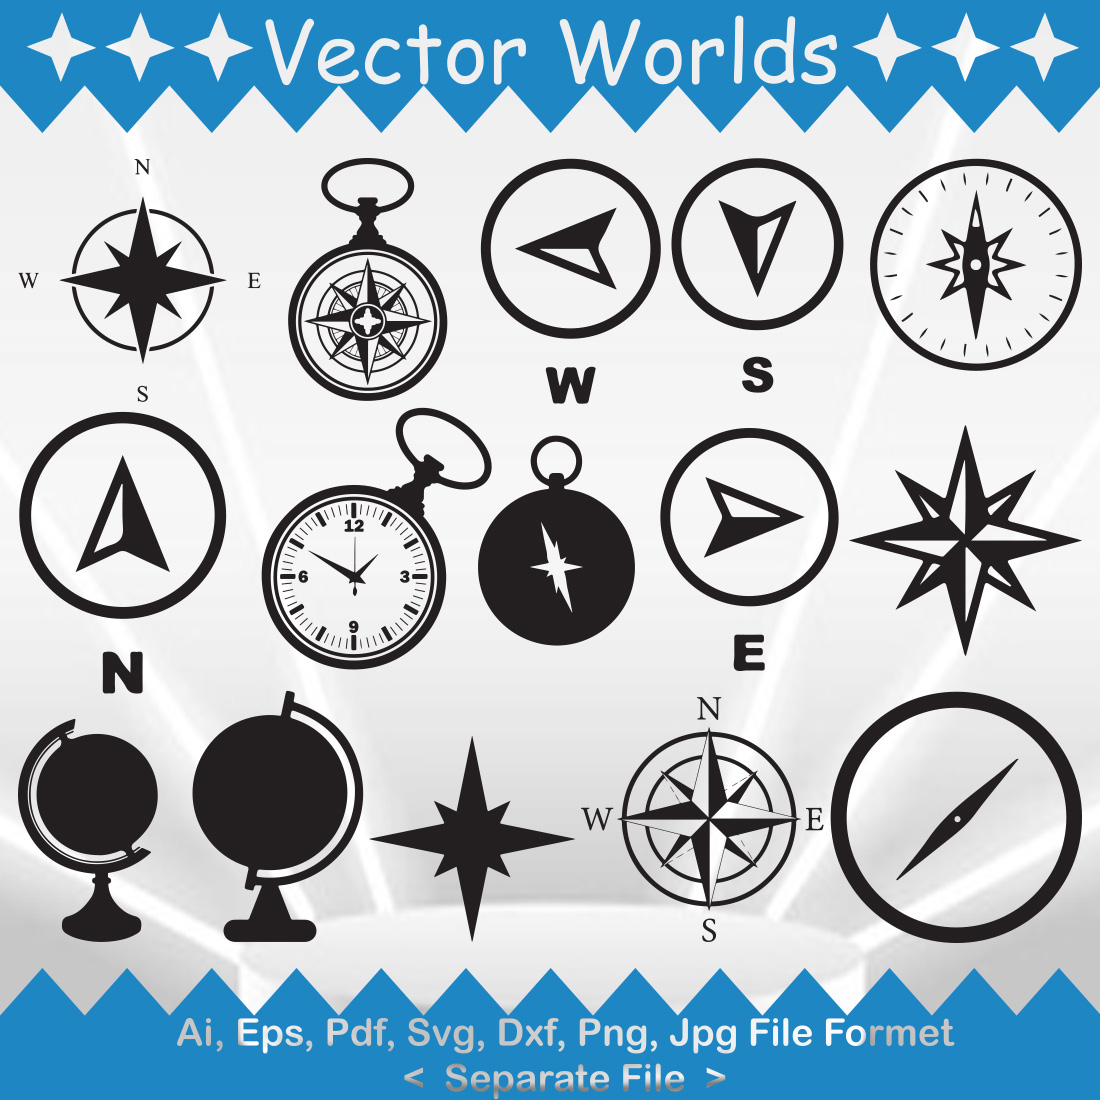 Collection of gorgeous vector images of compass silhouettes